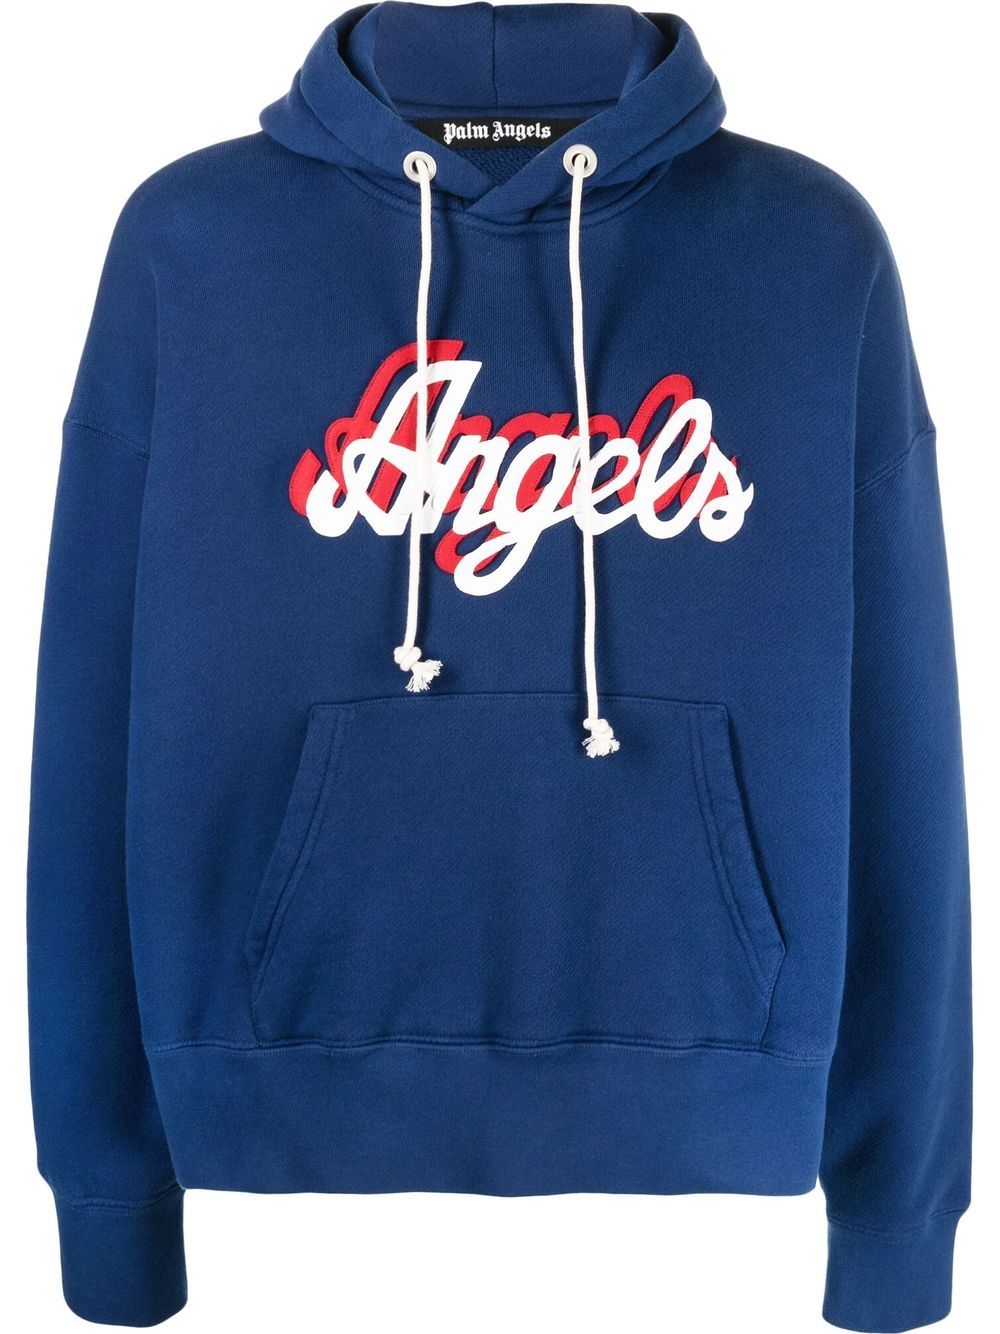 Palm Angels double logo hoodie - Blue